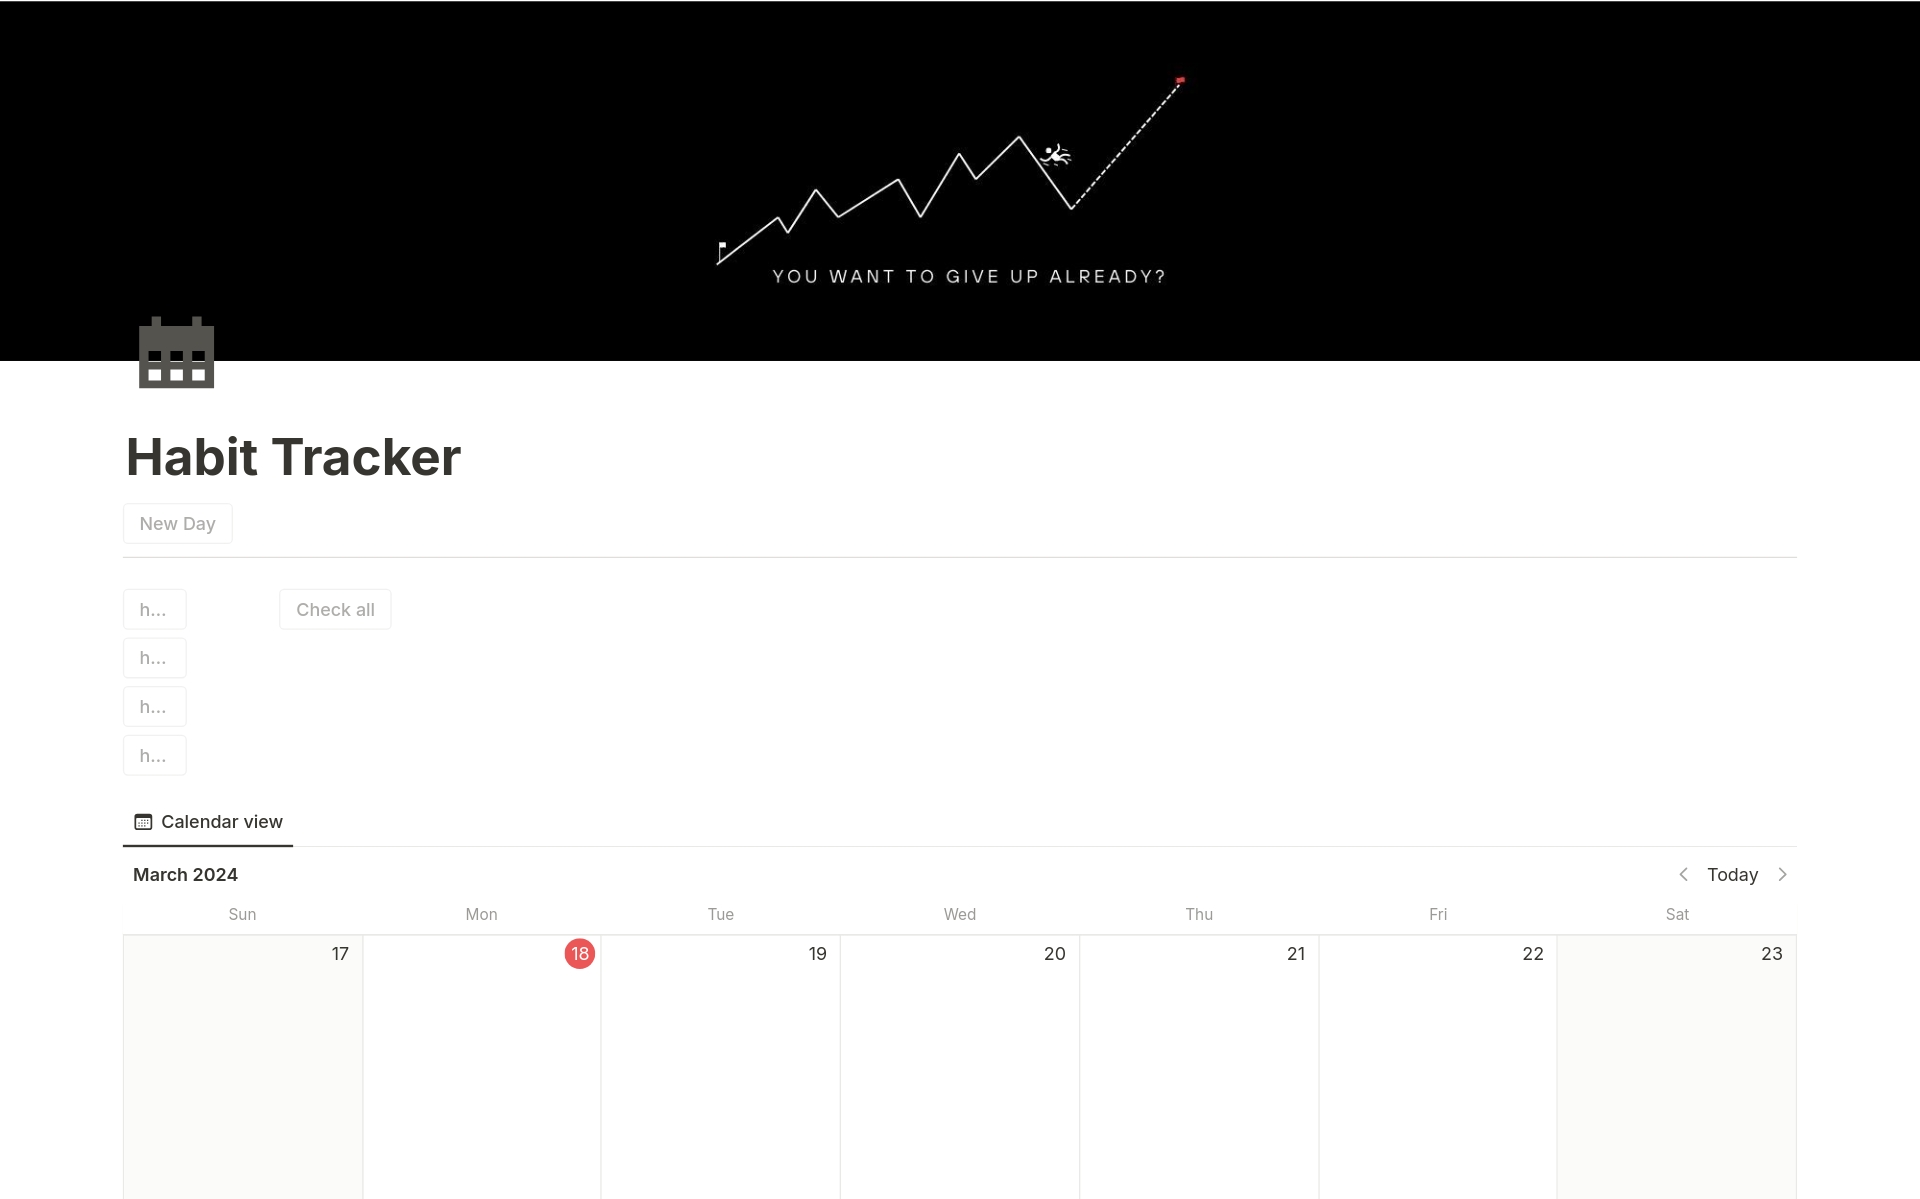 This Habit Tracker template in Notion allows you to monitor and track your daily habits. Here are the key features:
